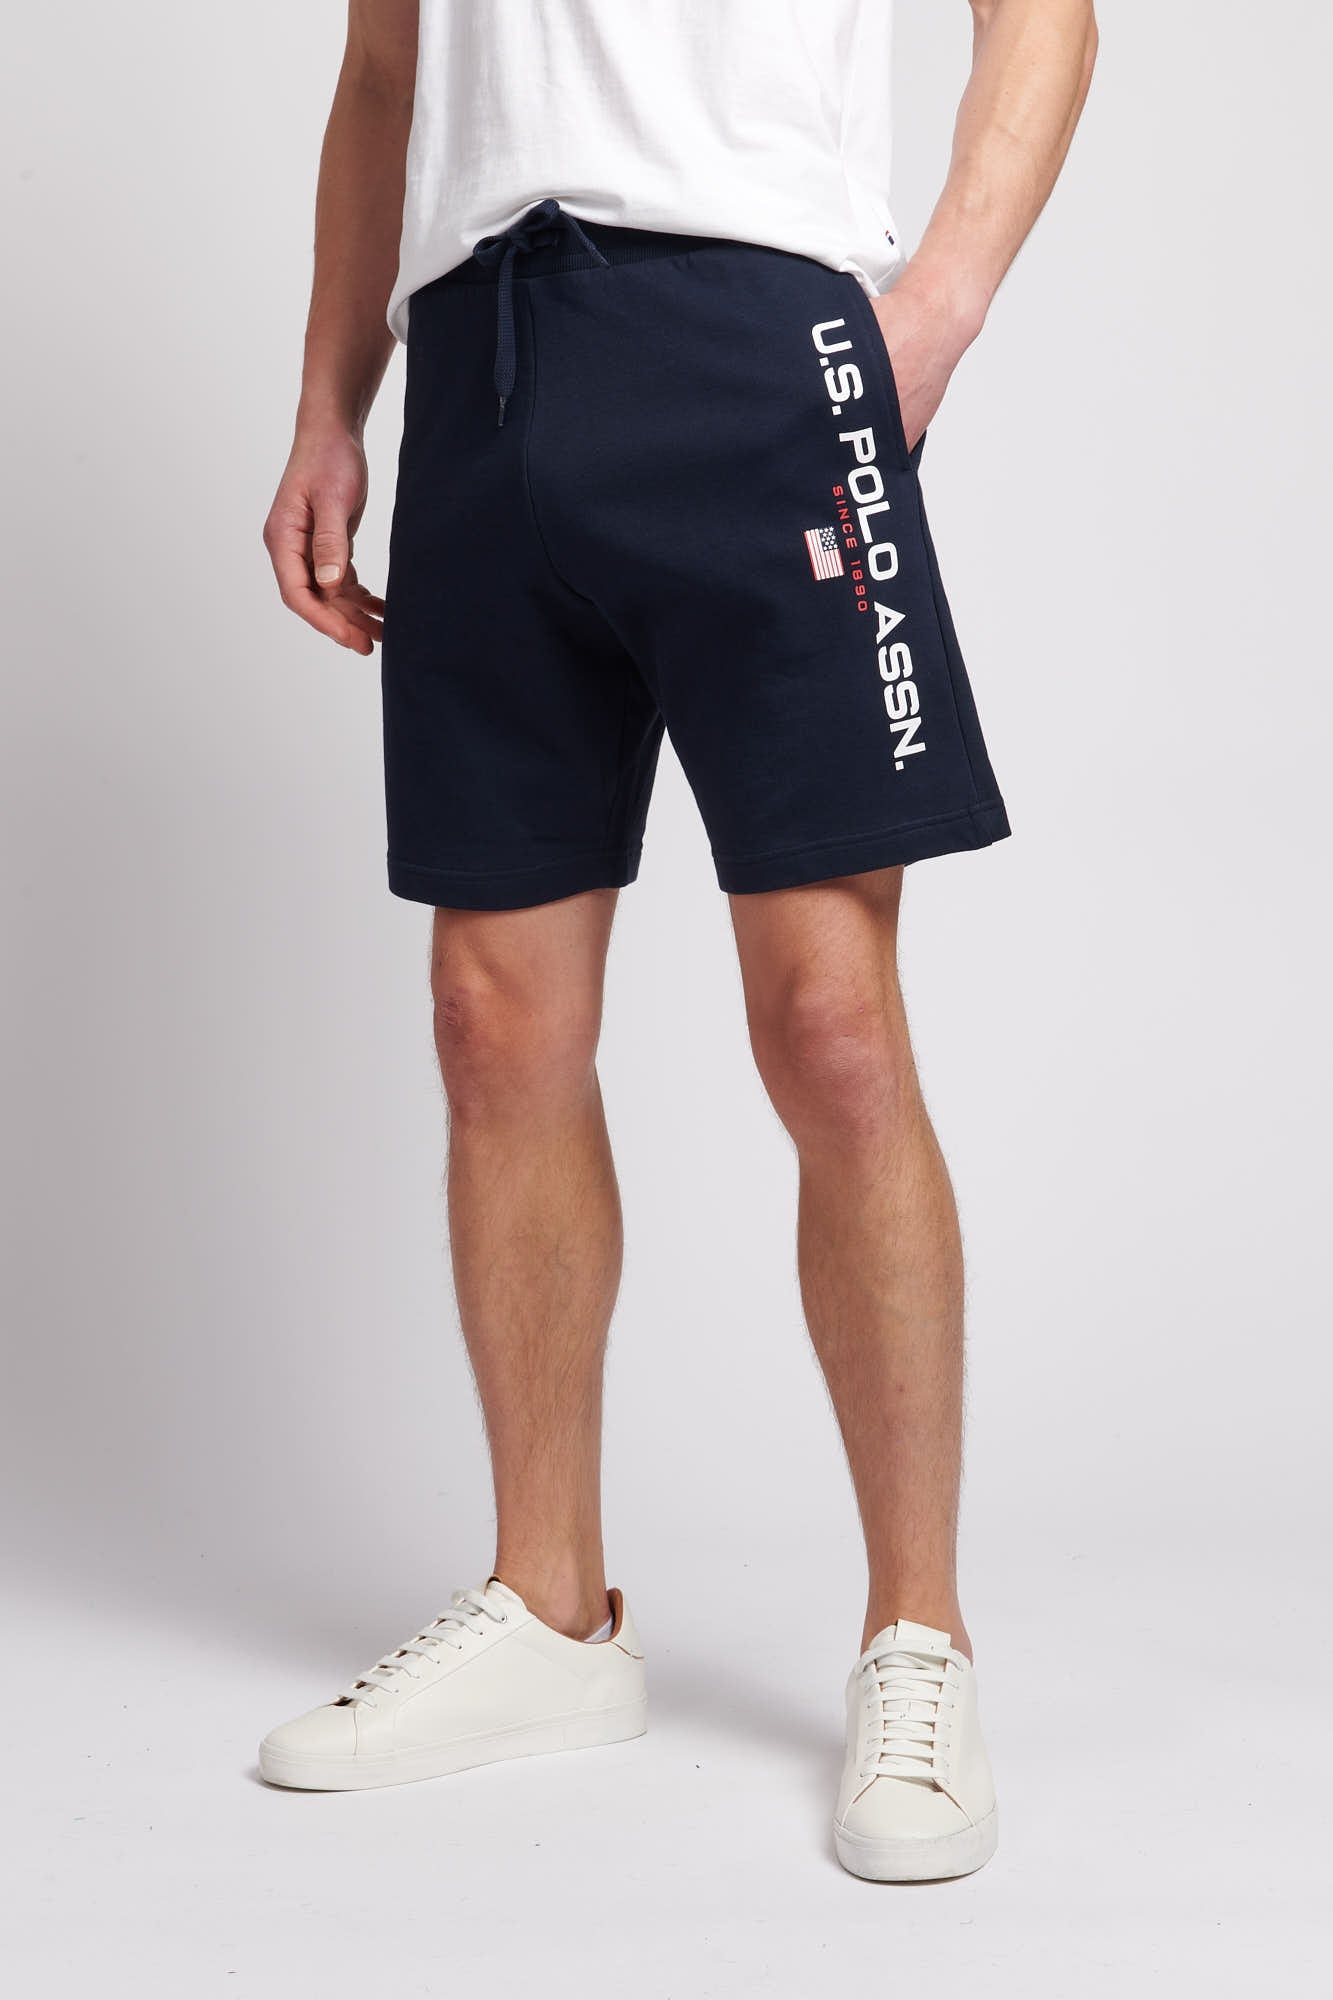 U.S. Polo Assn. Mens Block Flag Graphic Shorts in Navy Blue